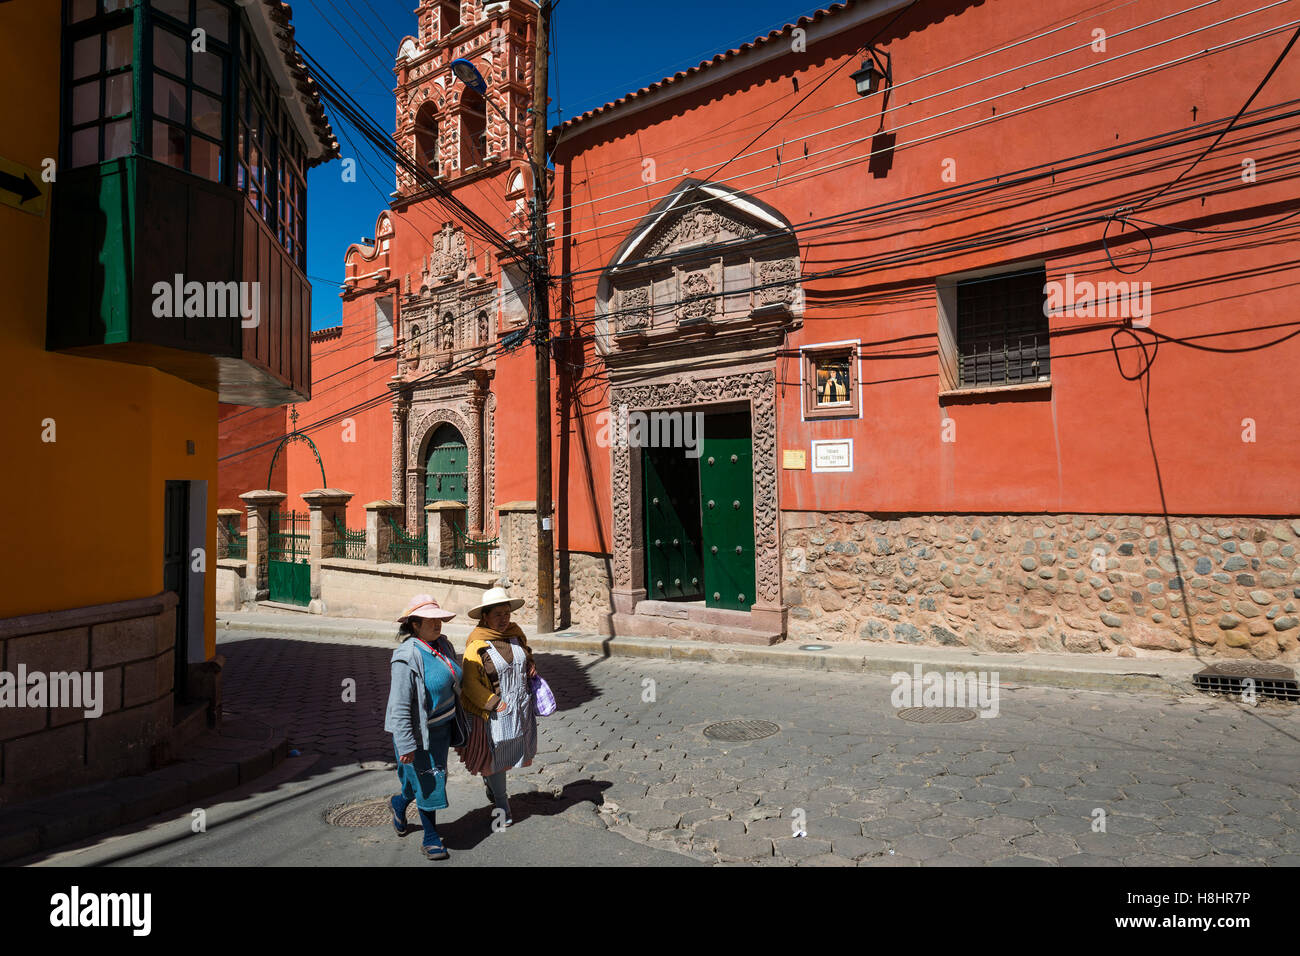 Potosi, Bolivia - November 29, 2013: Two women wearing traditional clothes in the city of Potosi in Bolivia. Stock Photo